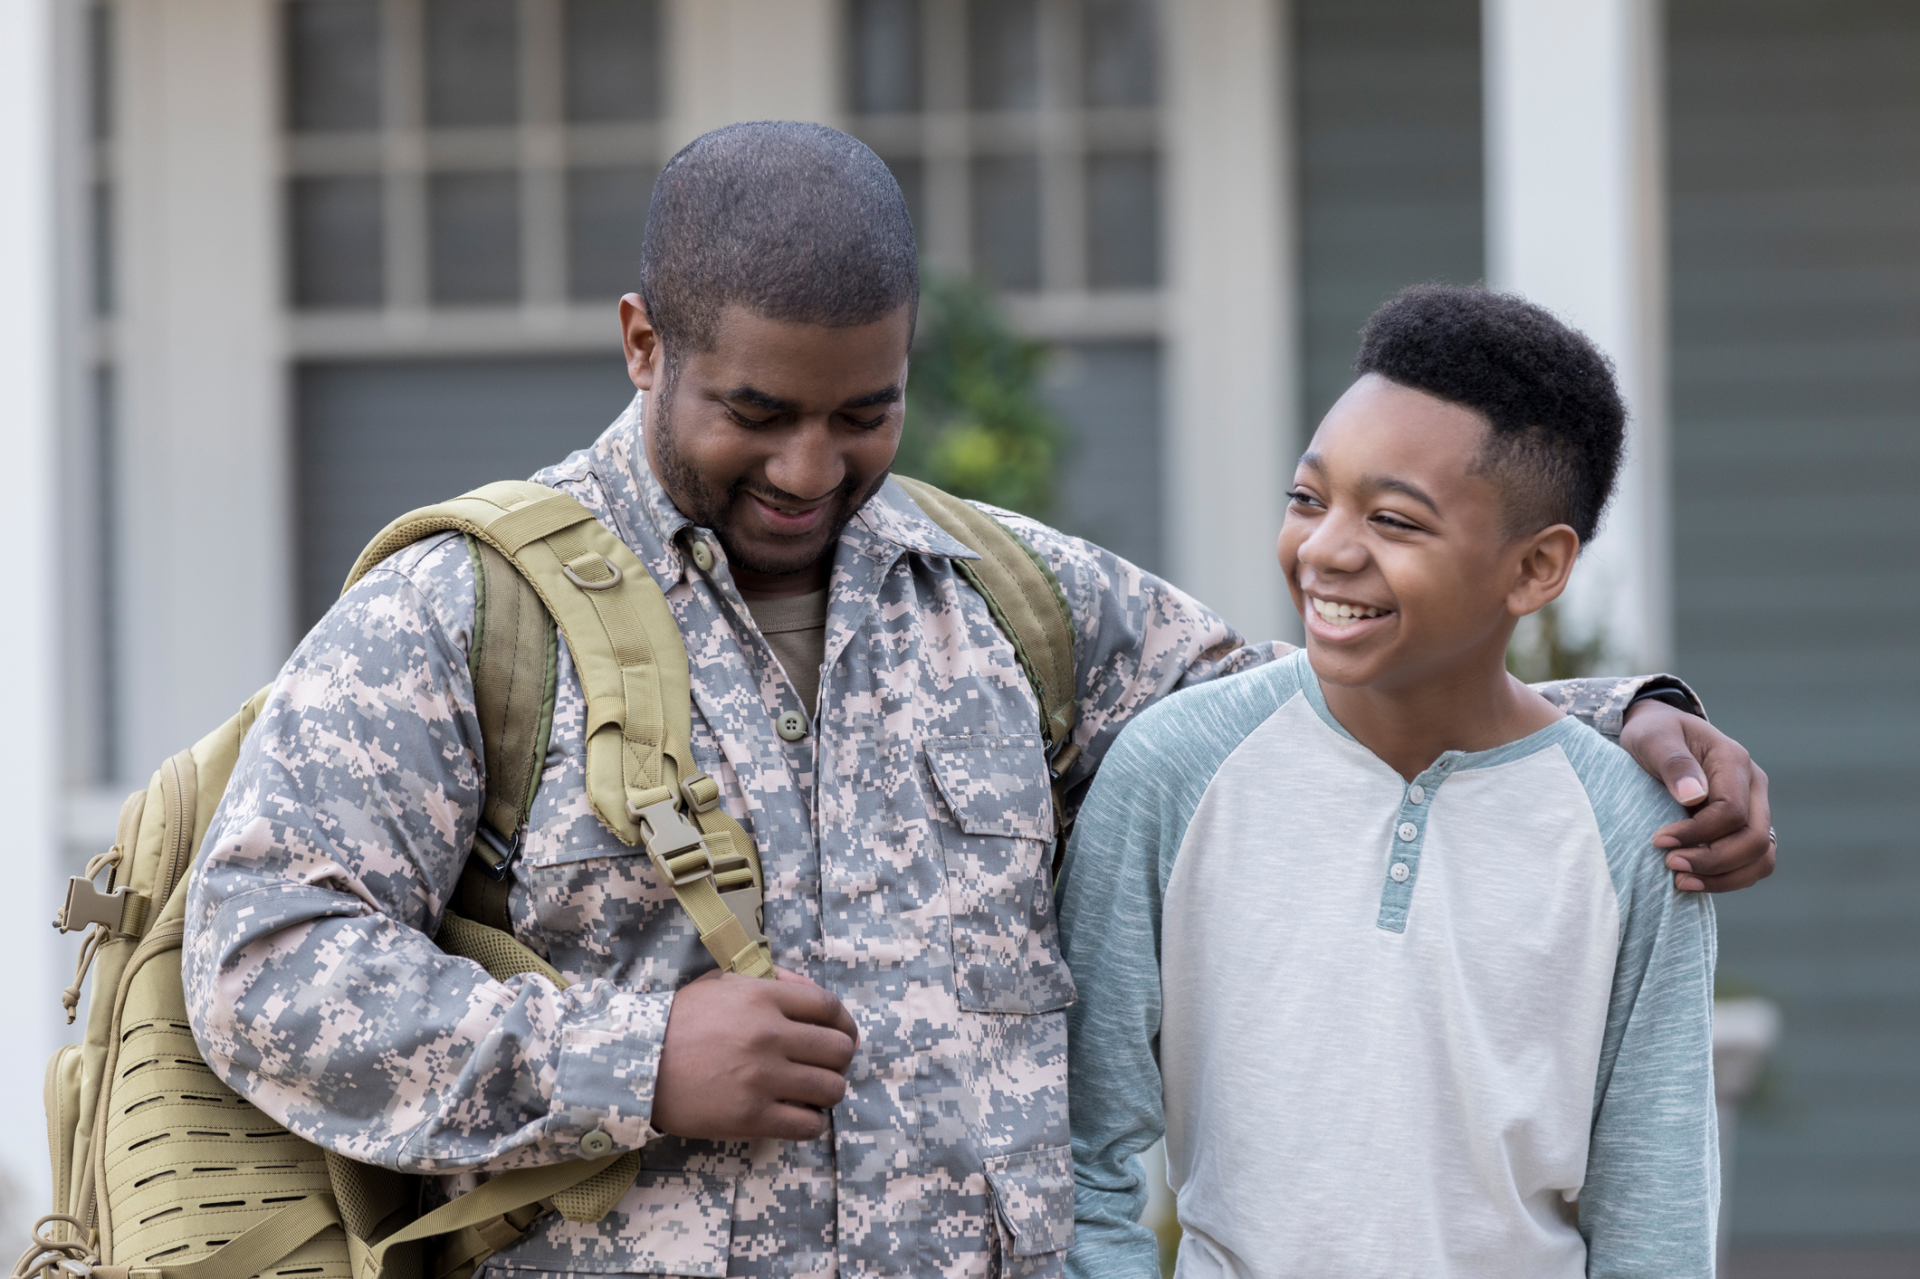 Military parent and middle school student walking together arm in arm.